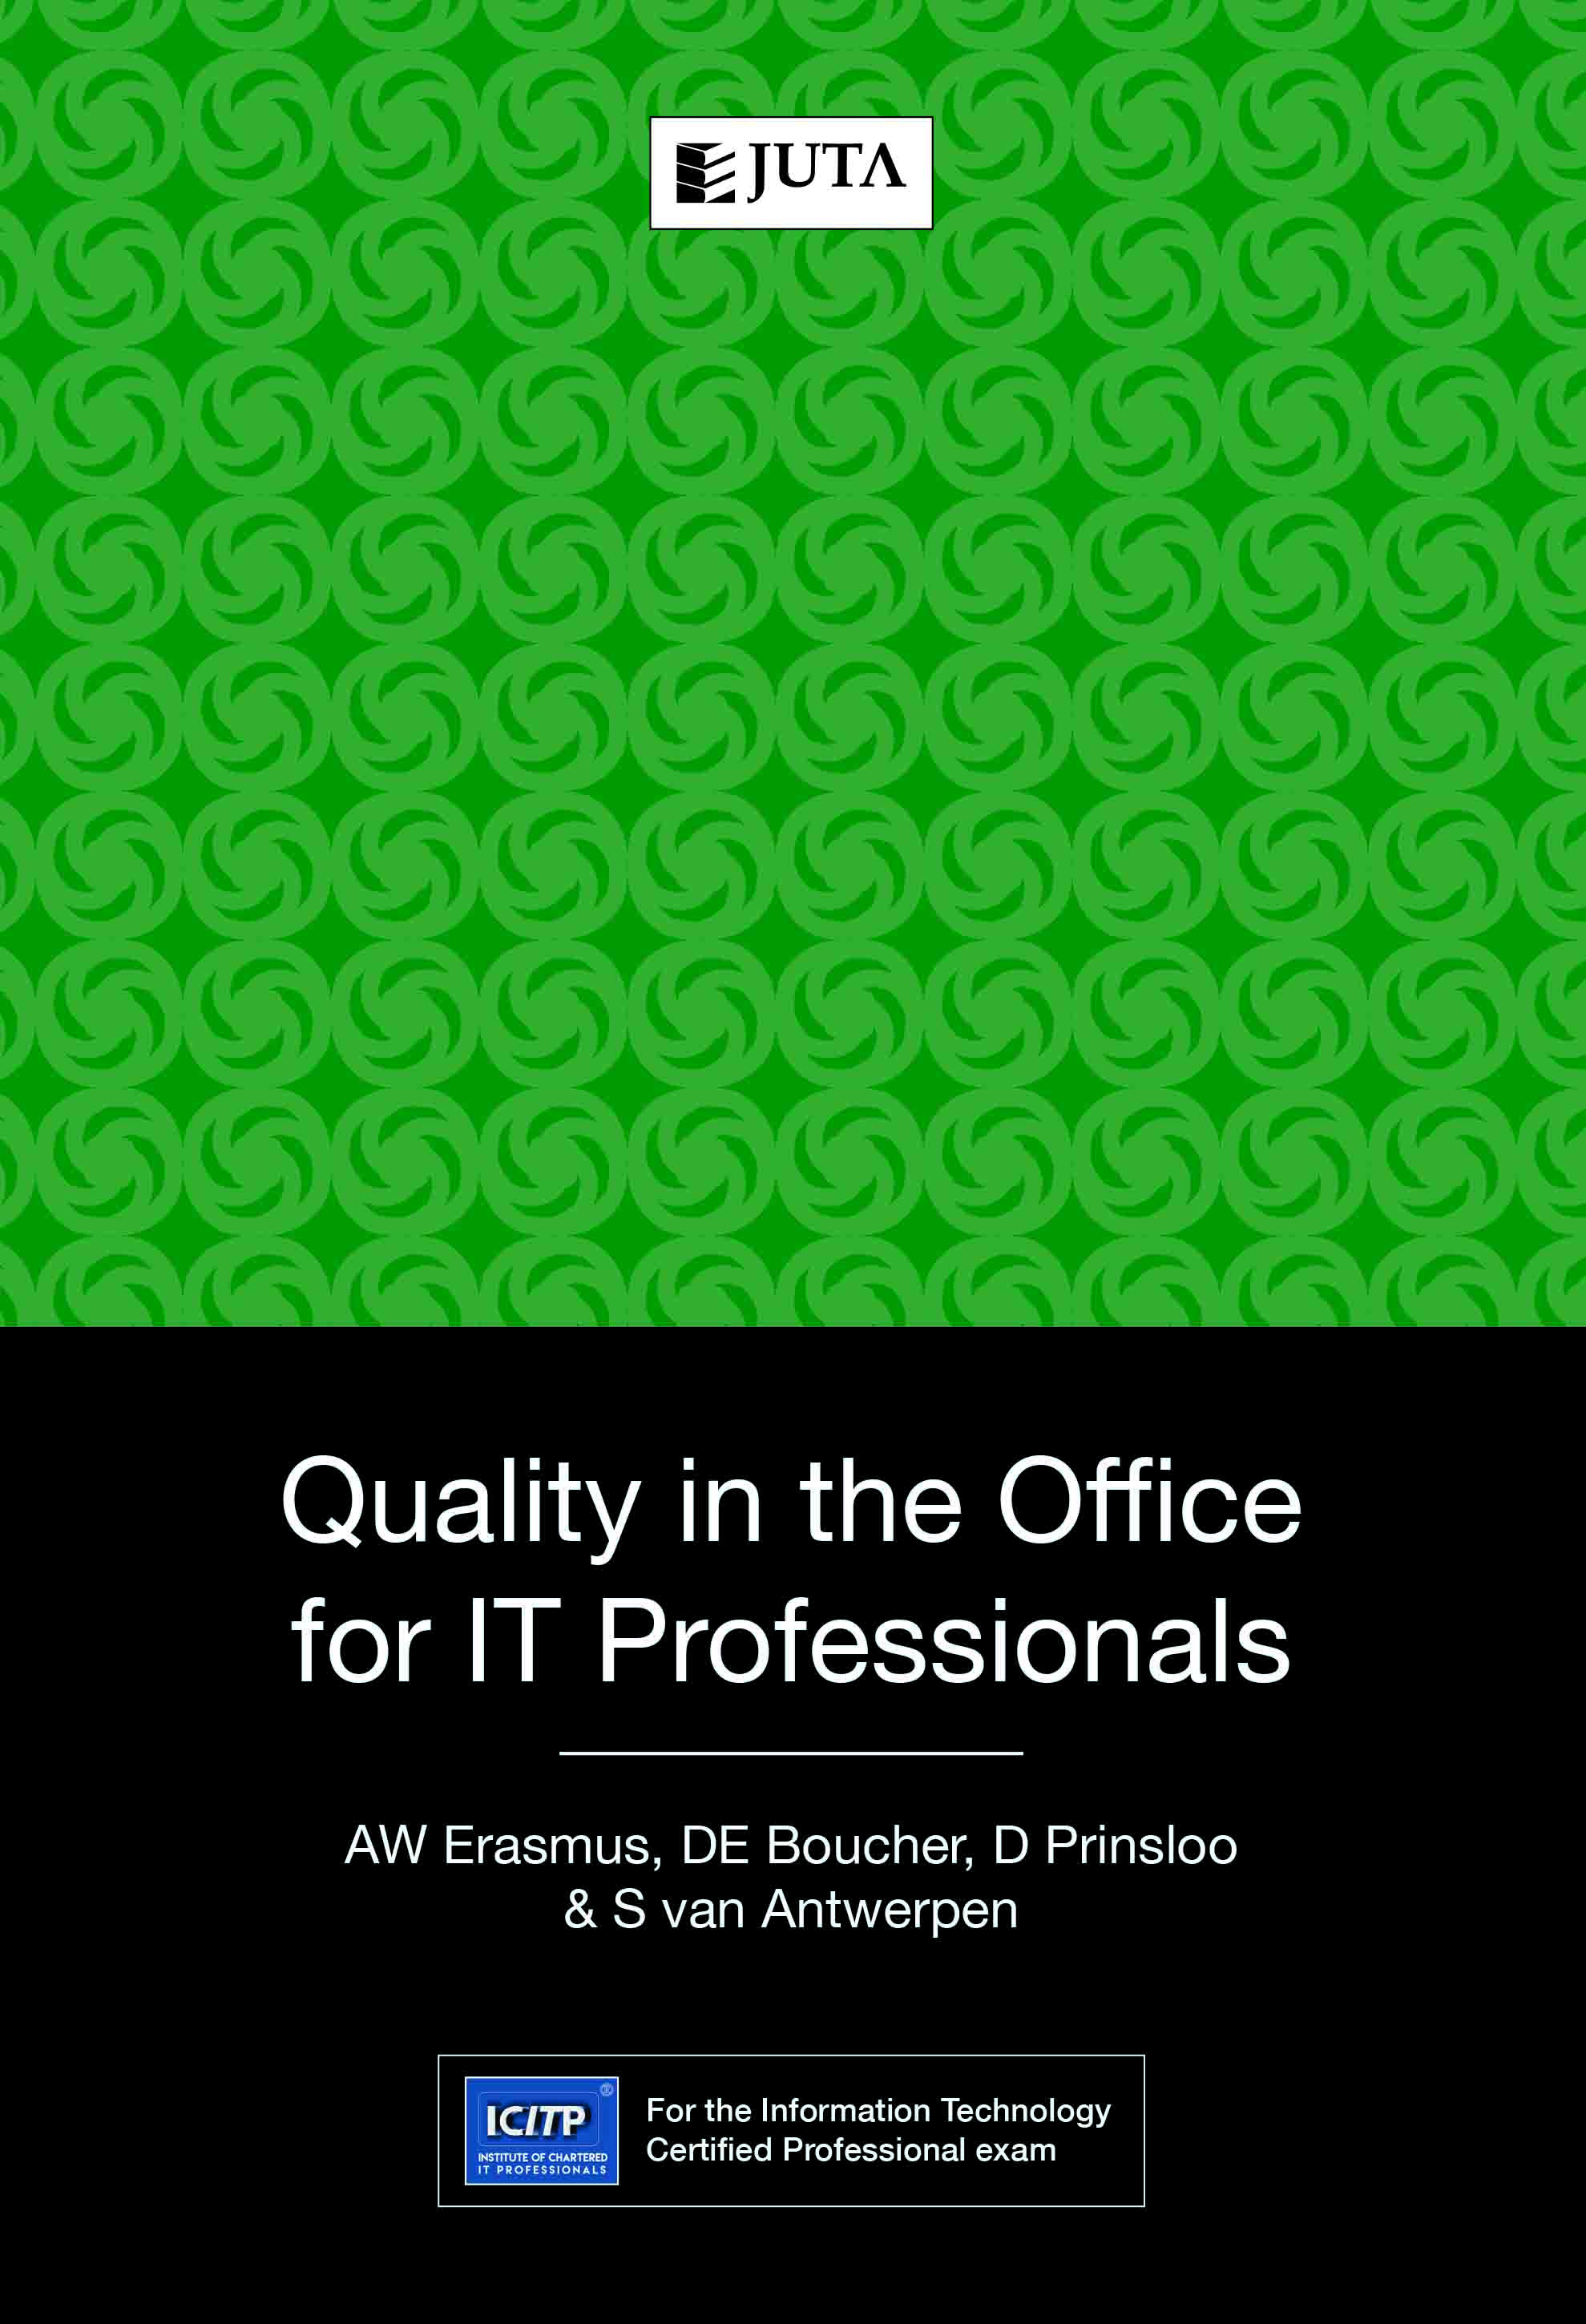 Quality in the Office for IT Professionals